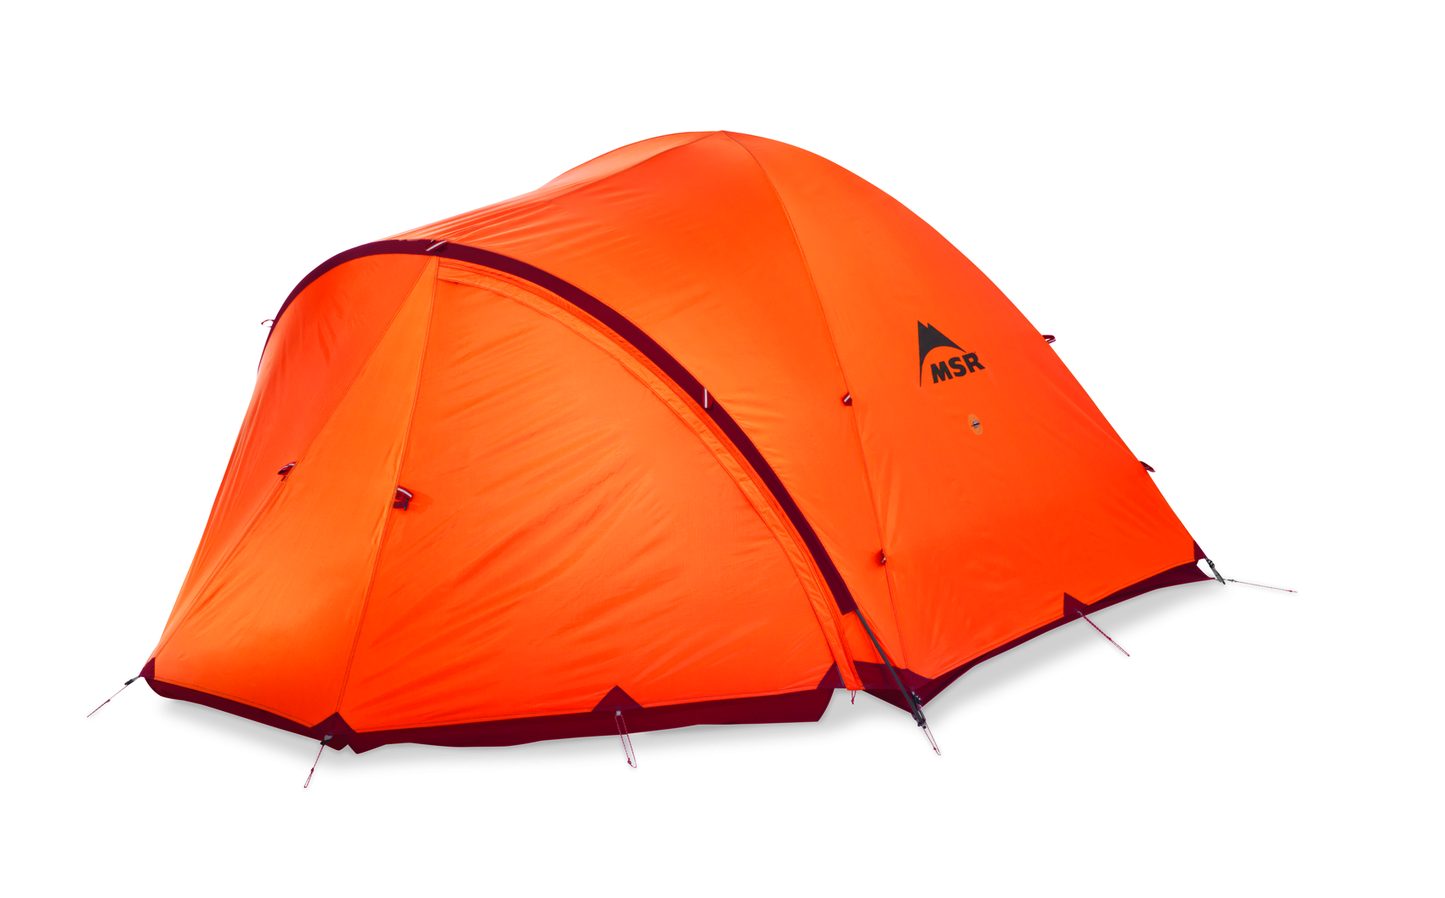 Remote 2 Two-Person Mountaineering Tent - by MSR